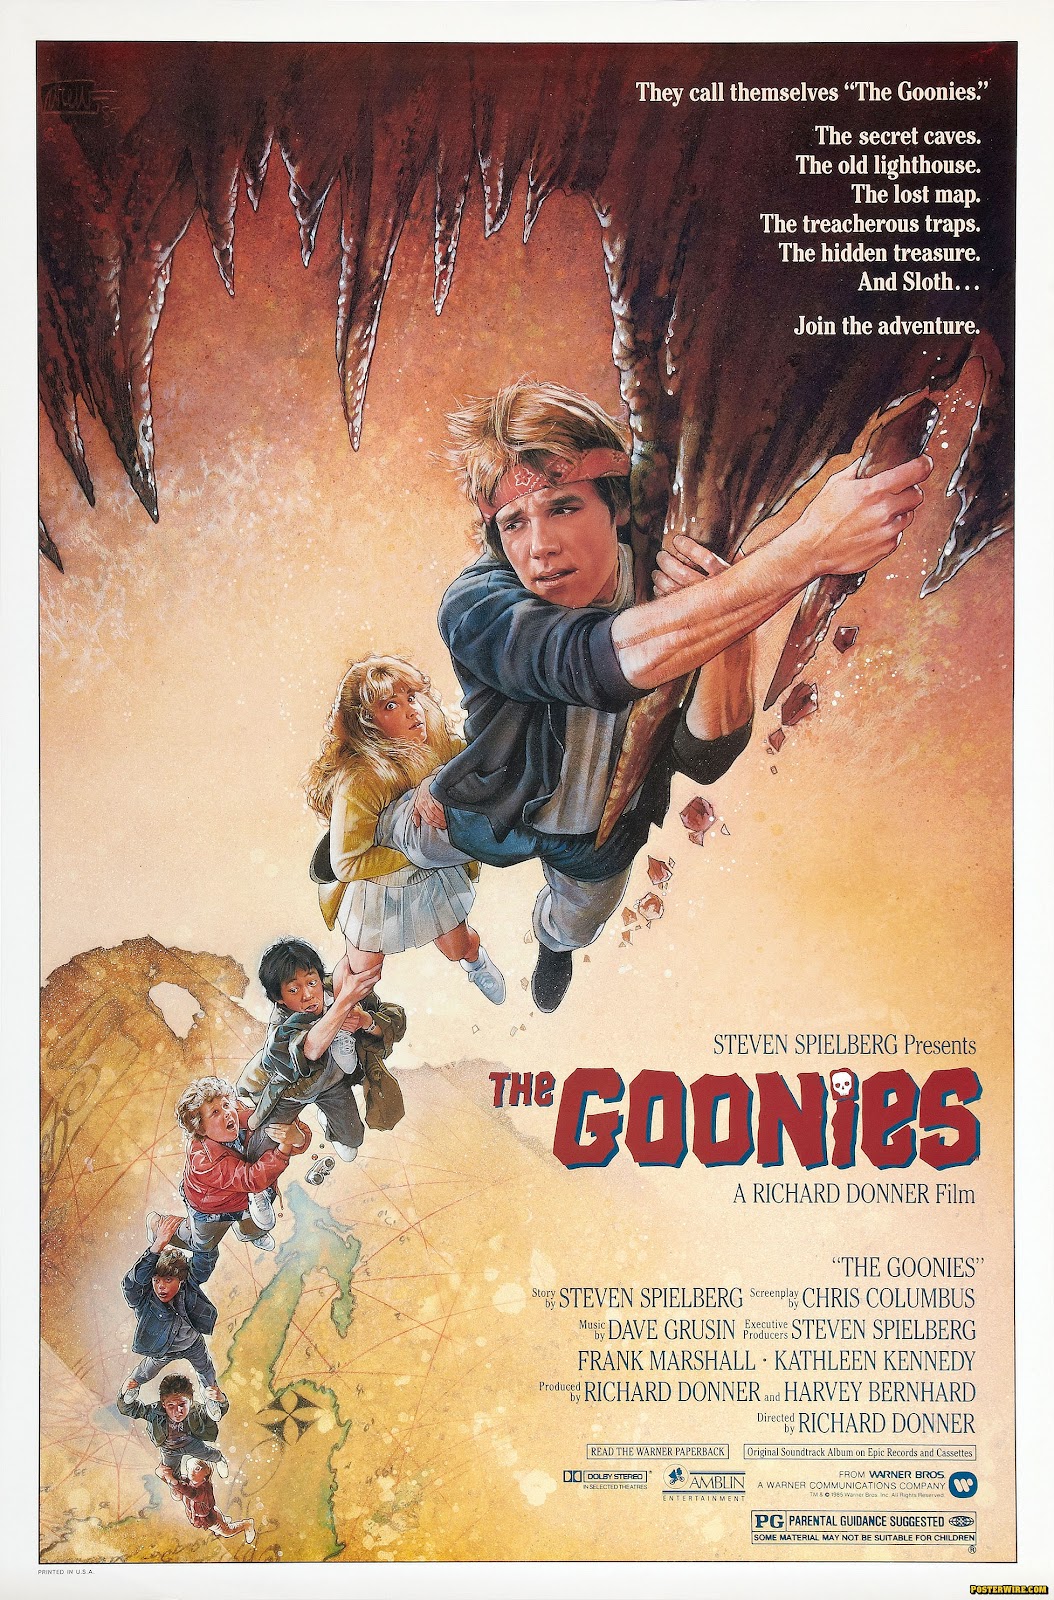 goonies poster hd - They call themselves "The Googles." These ares. The old lighthouse. The lost ma The reachers traps. The Middle treasure. And Sleth... Join the adventure Steven Heine Thegoonies Archard Inner Film The Coonies Steuen Sibertechris Comas M